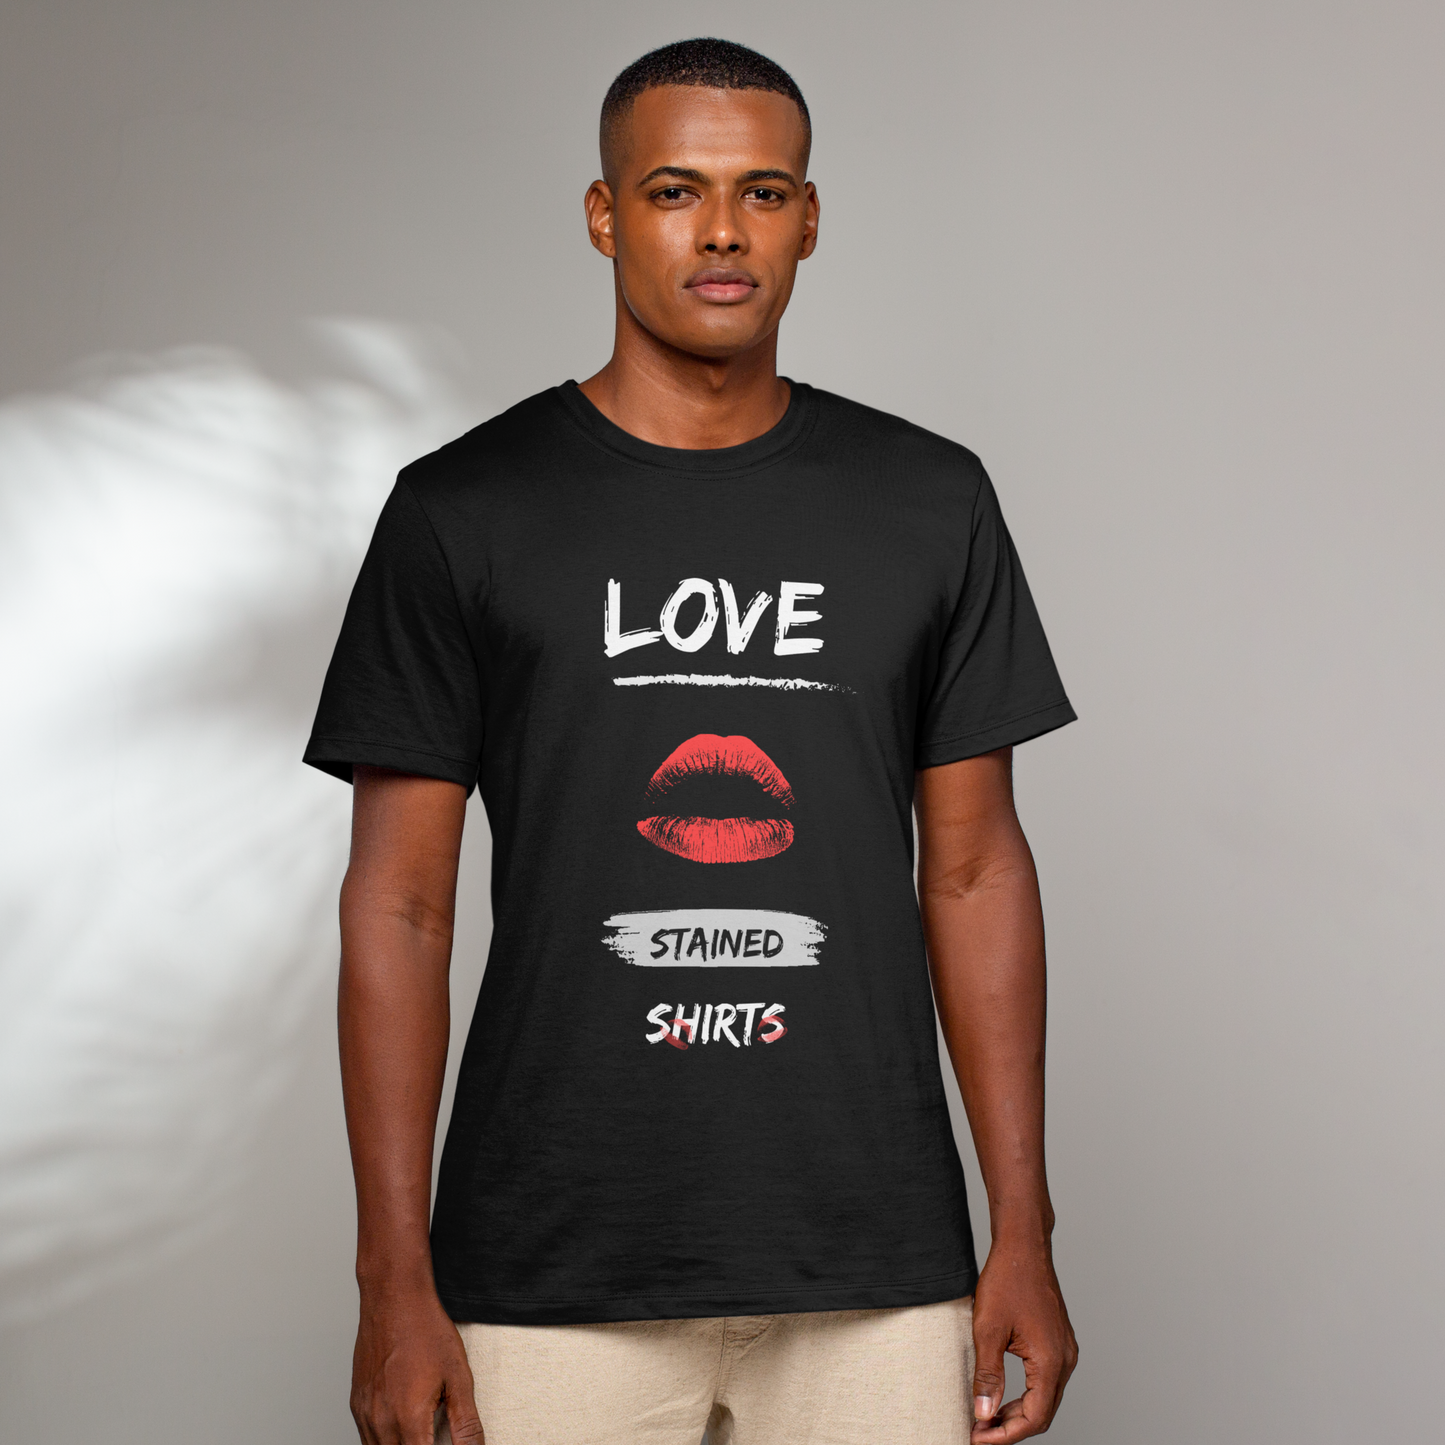 Love stained T-Shirt